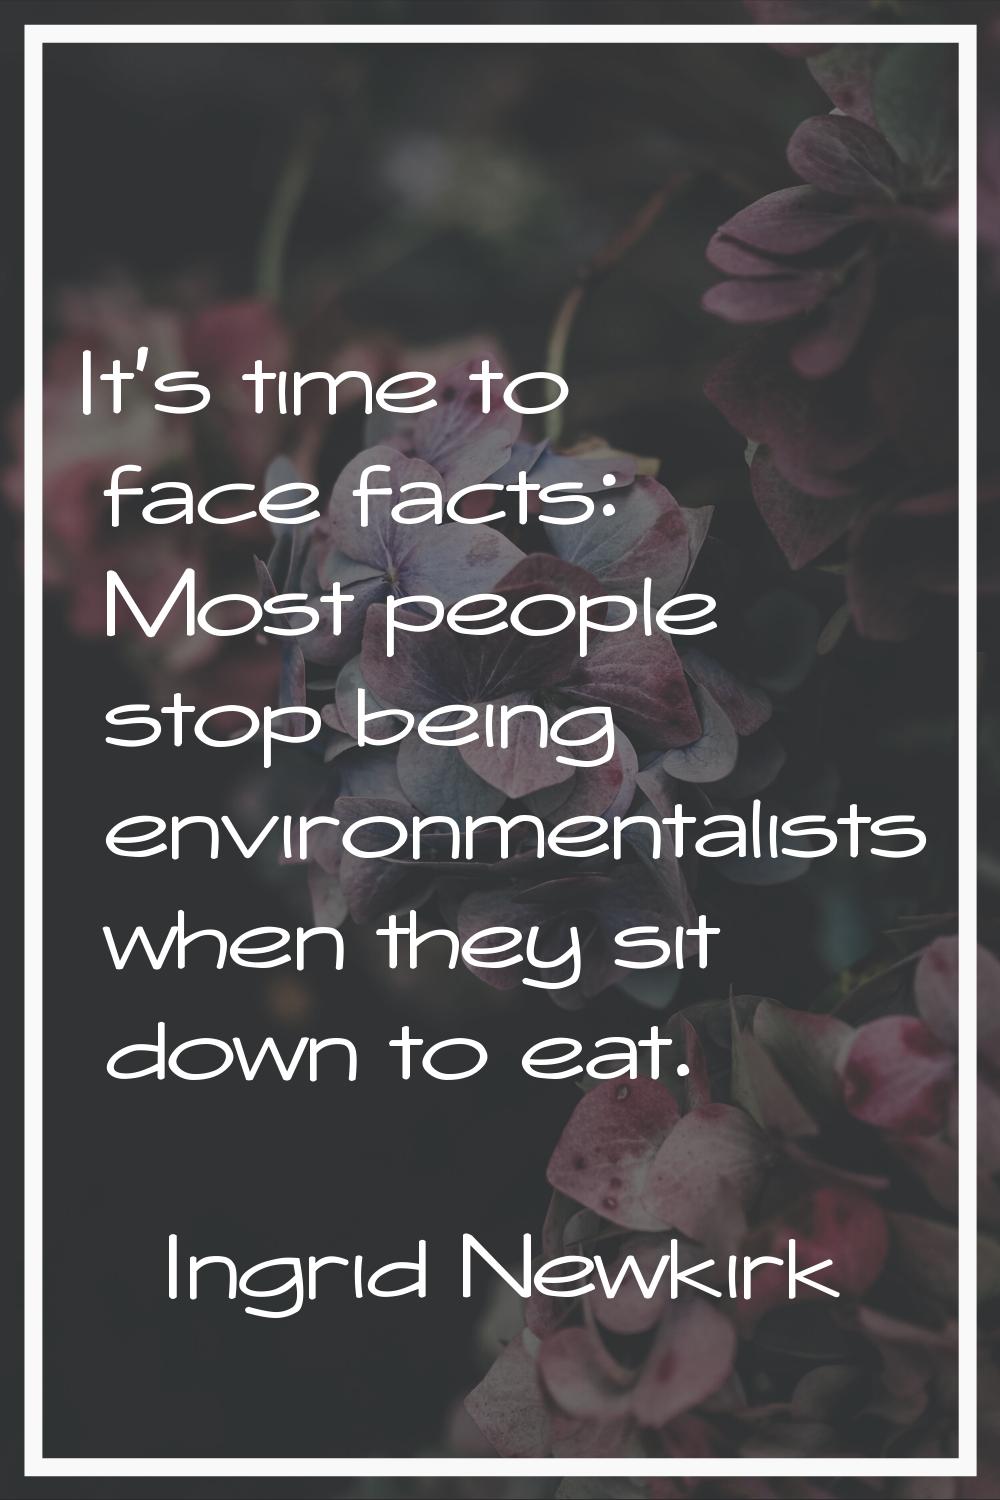 It's time to face facts: Most people stop being environmentalists when they sit down to eat.